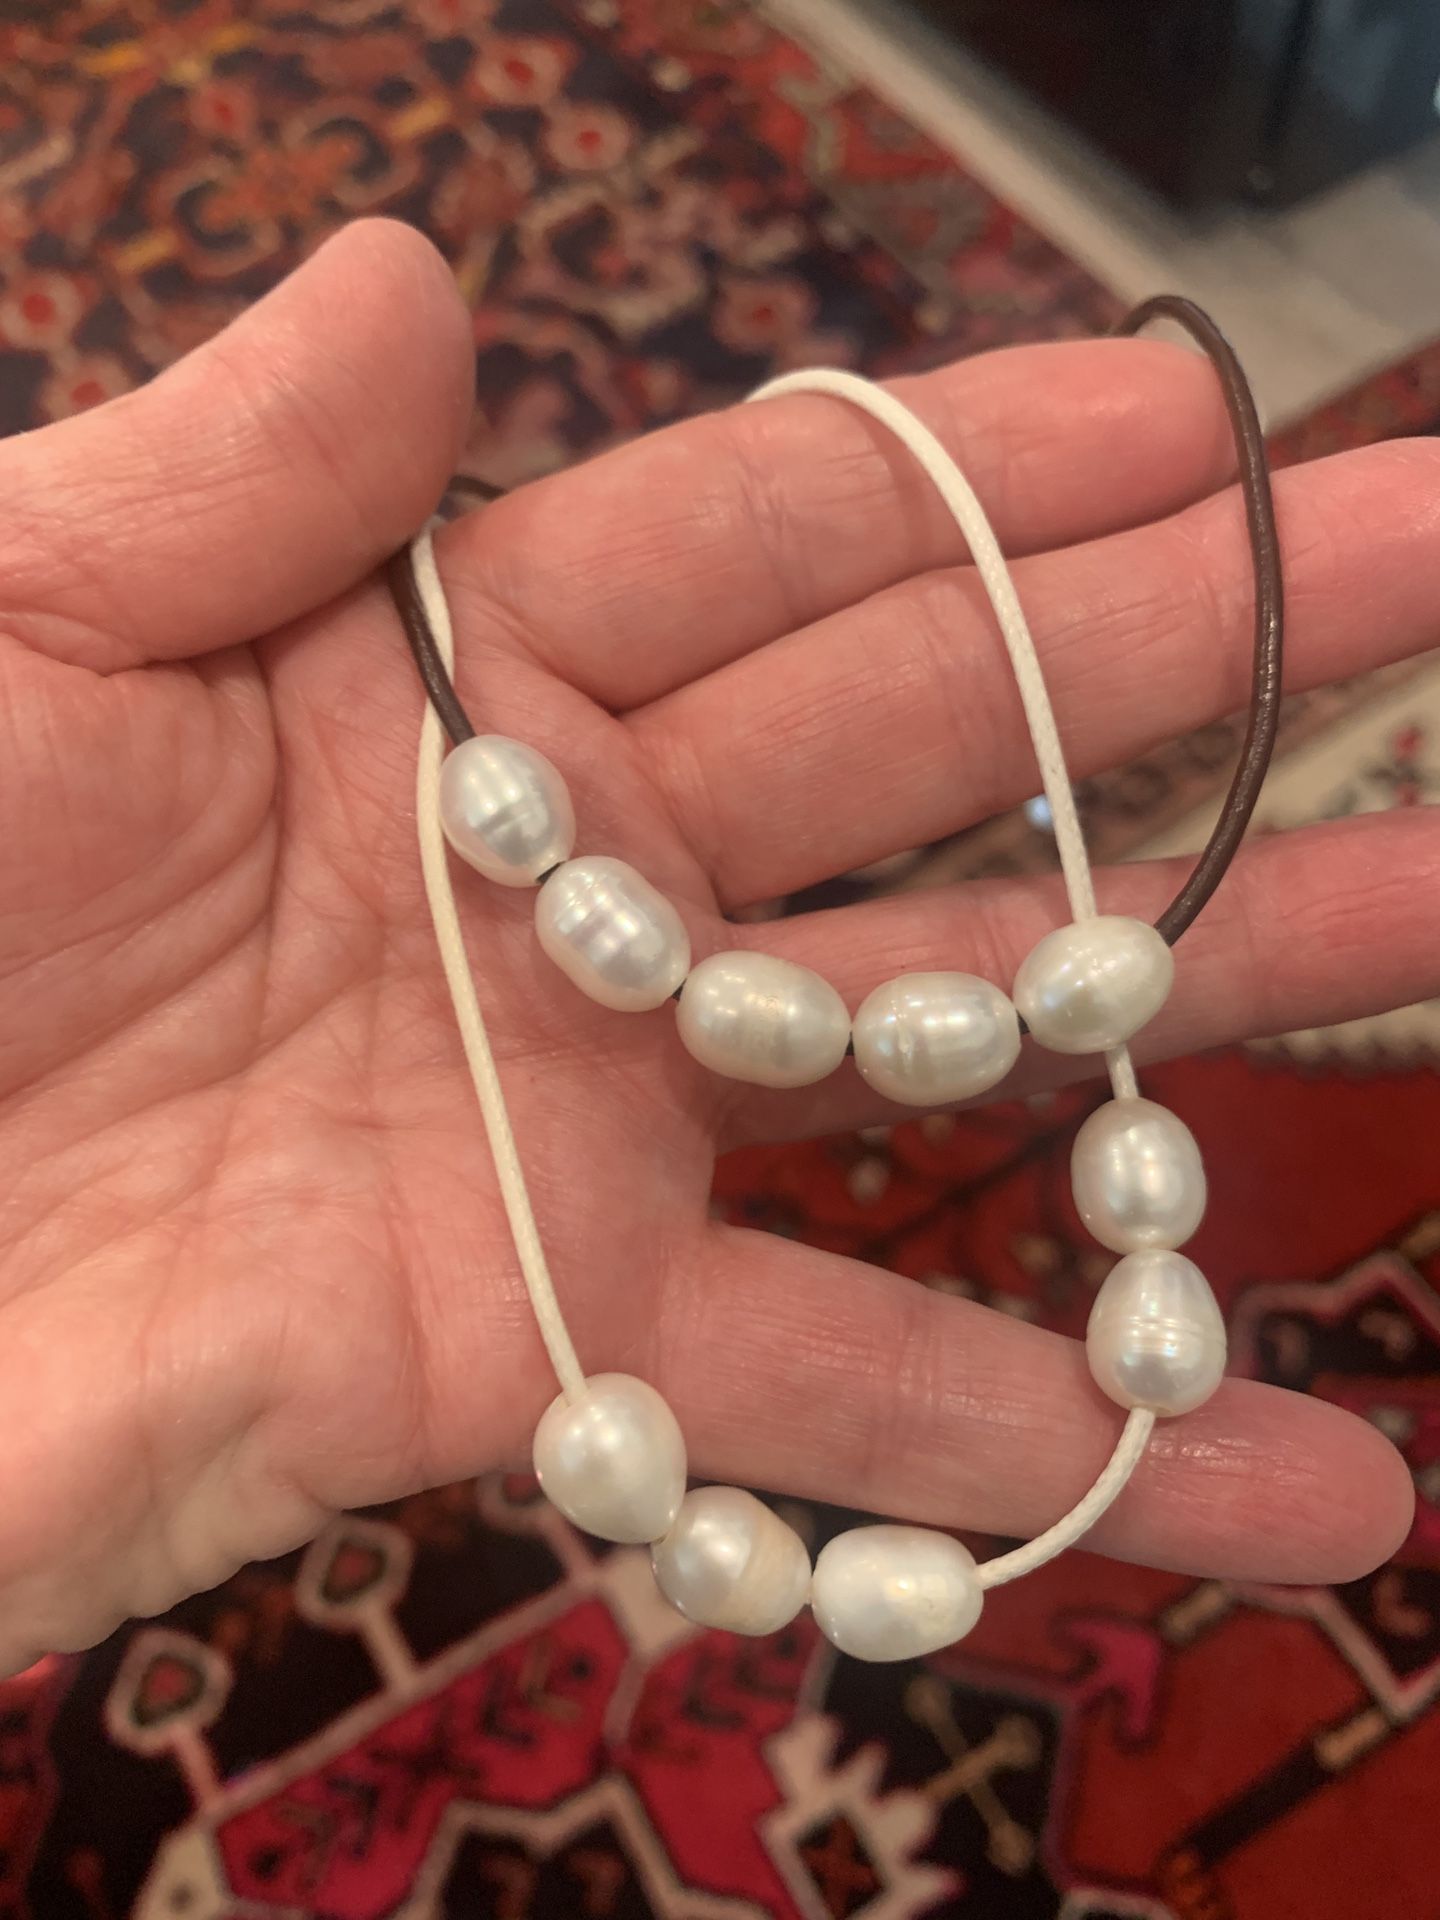 GENUINE PEARL NECKLACE CHOKERS-$25